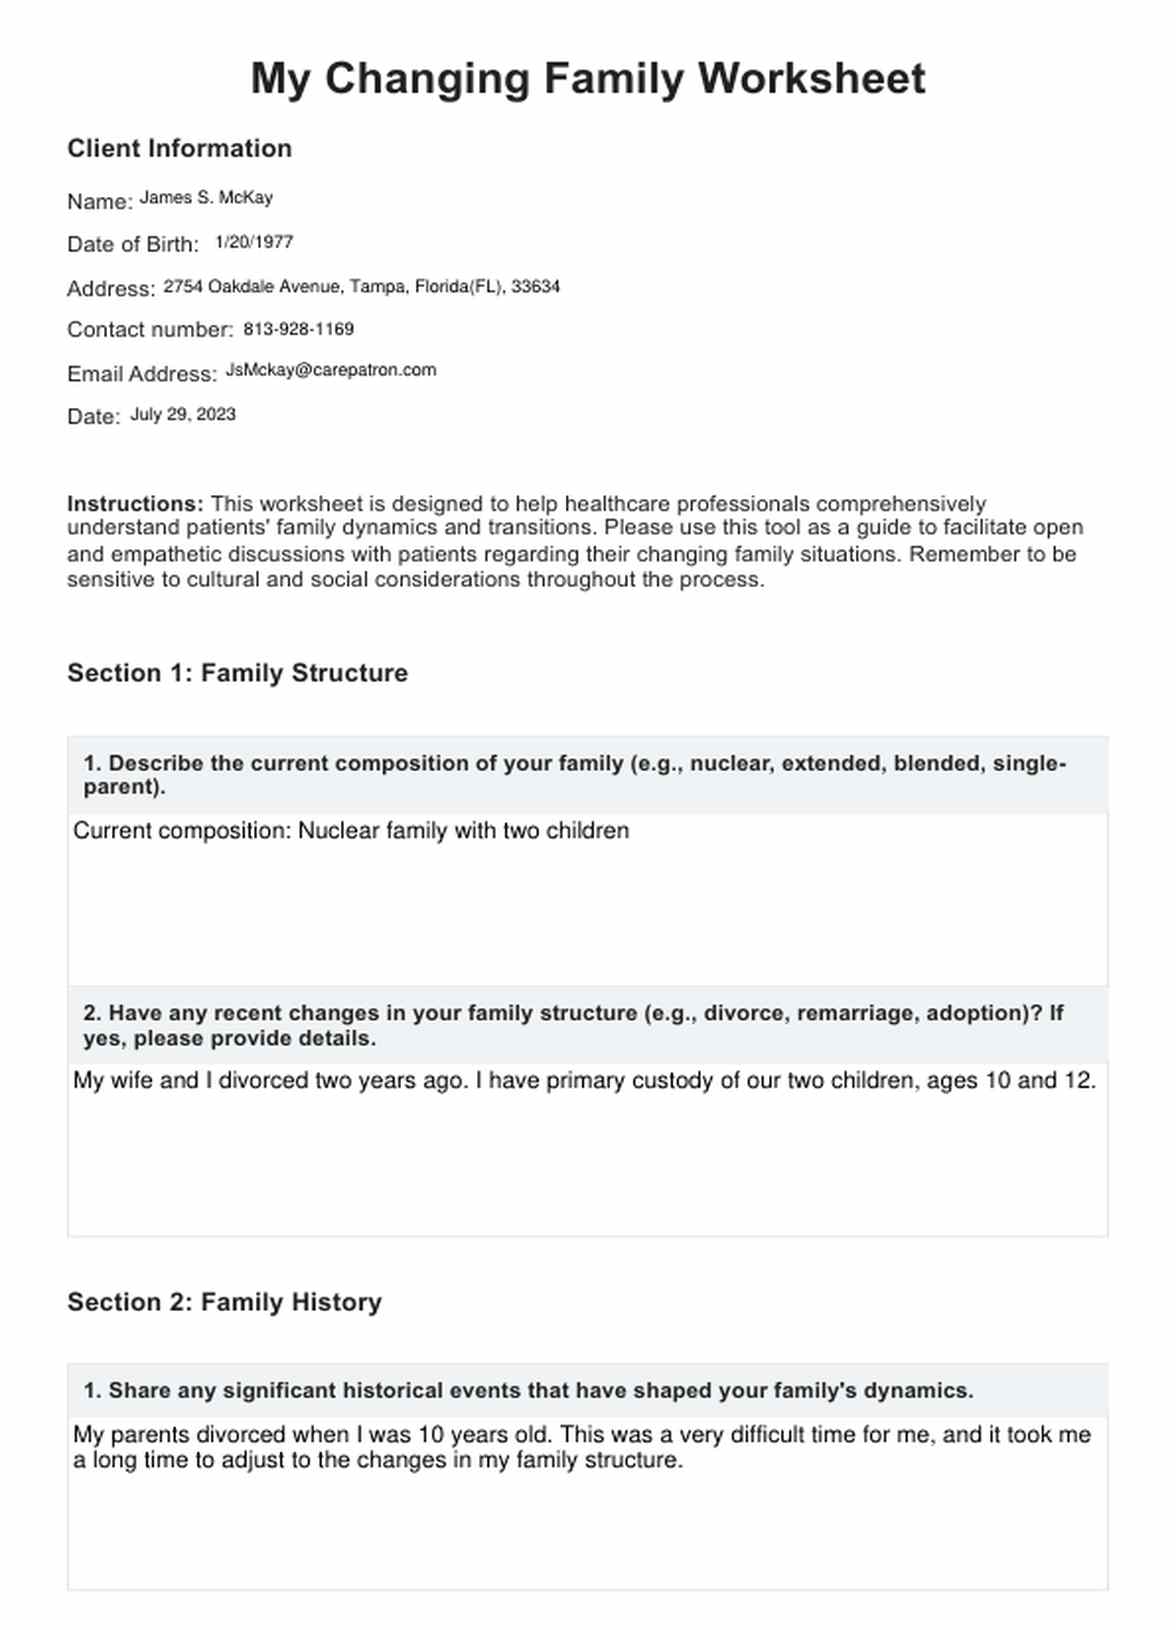 My Changing Family Worksheets PDF Example